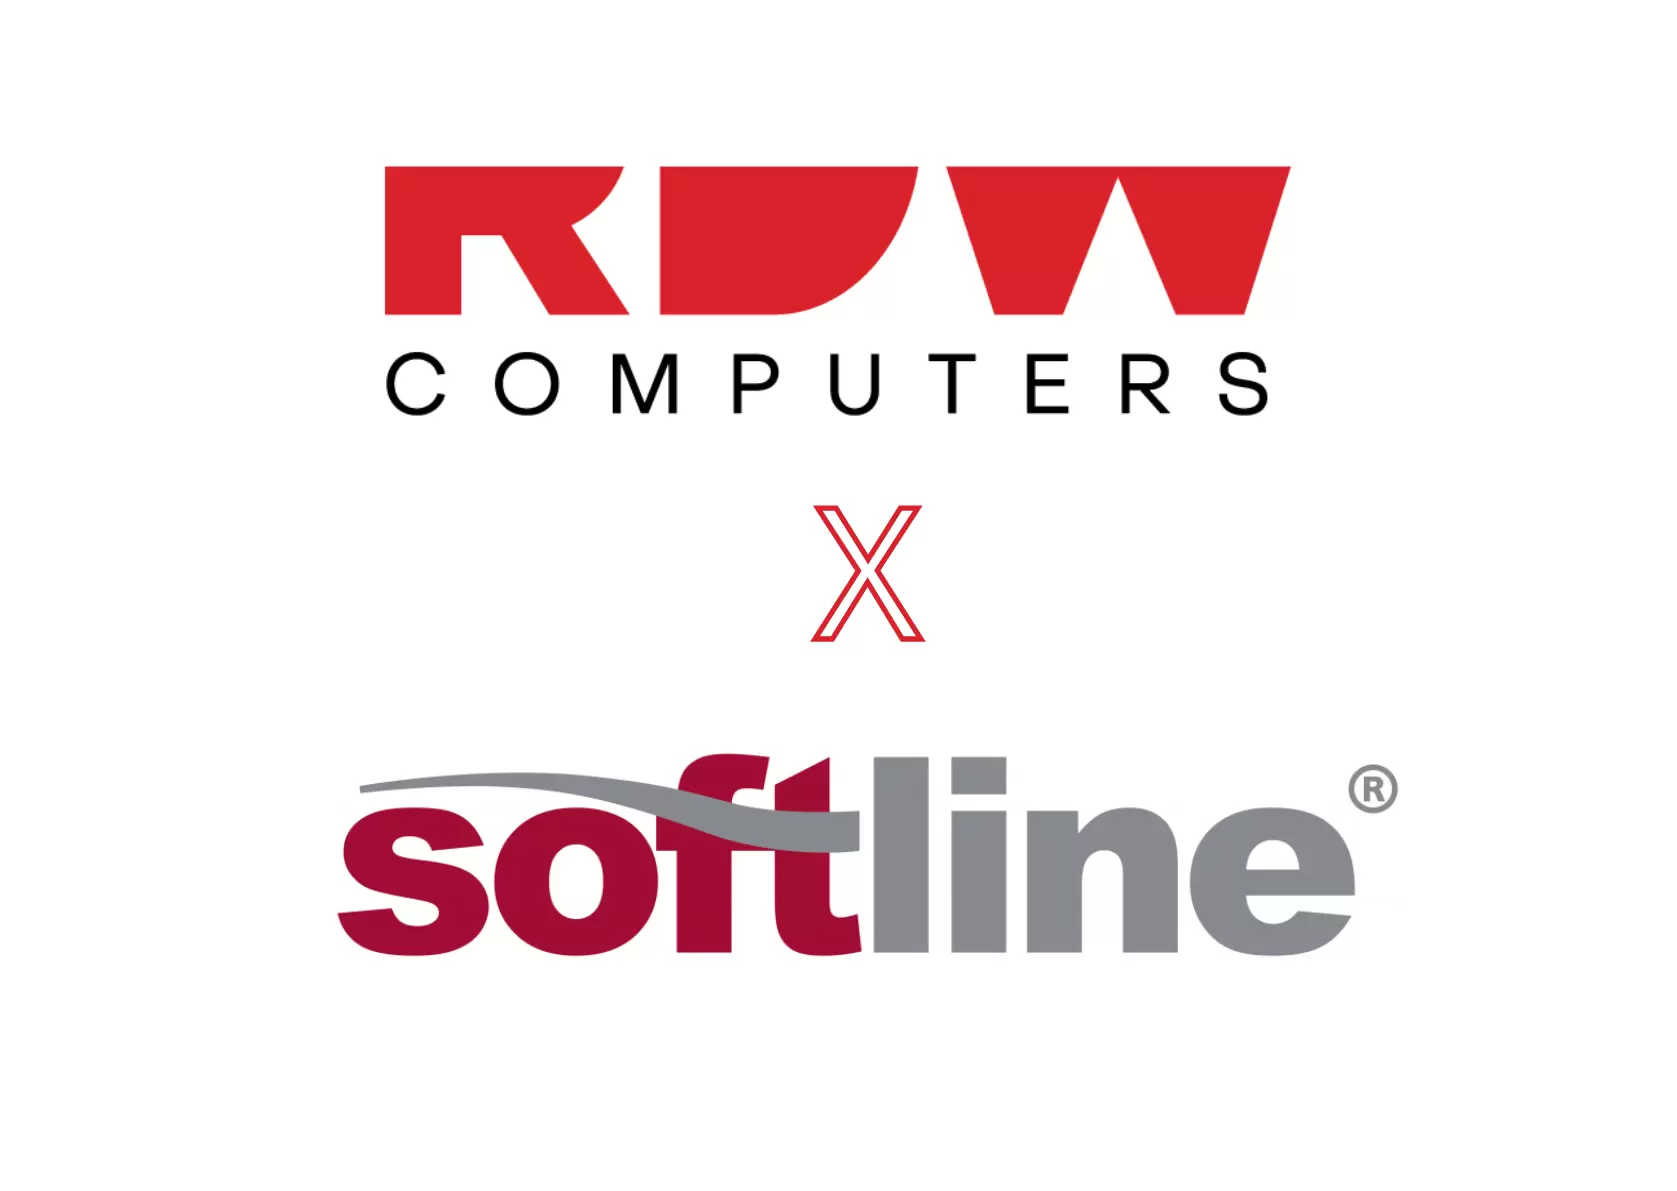 Softline has entered into a partnership agreement with RDW Technology